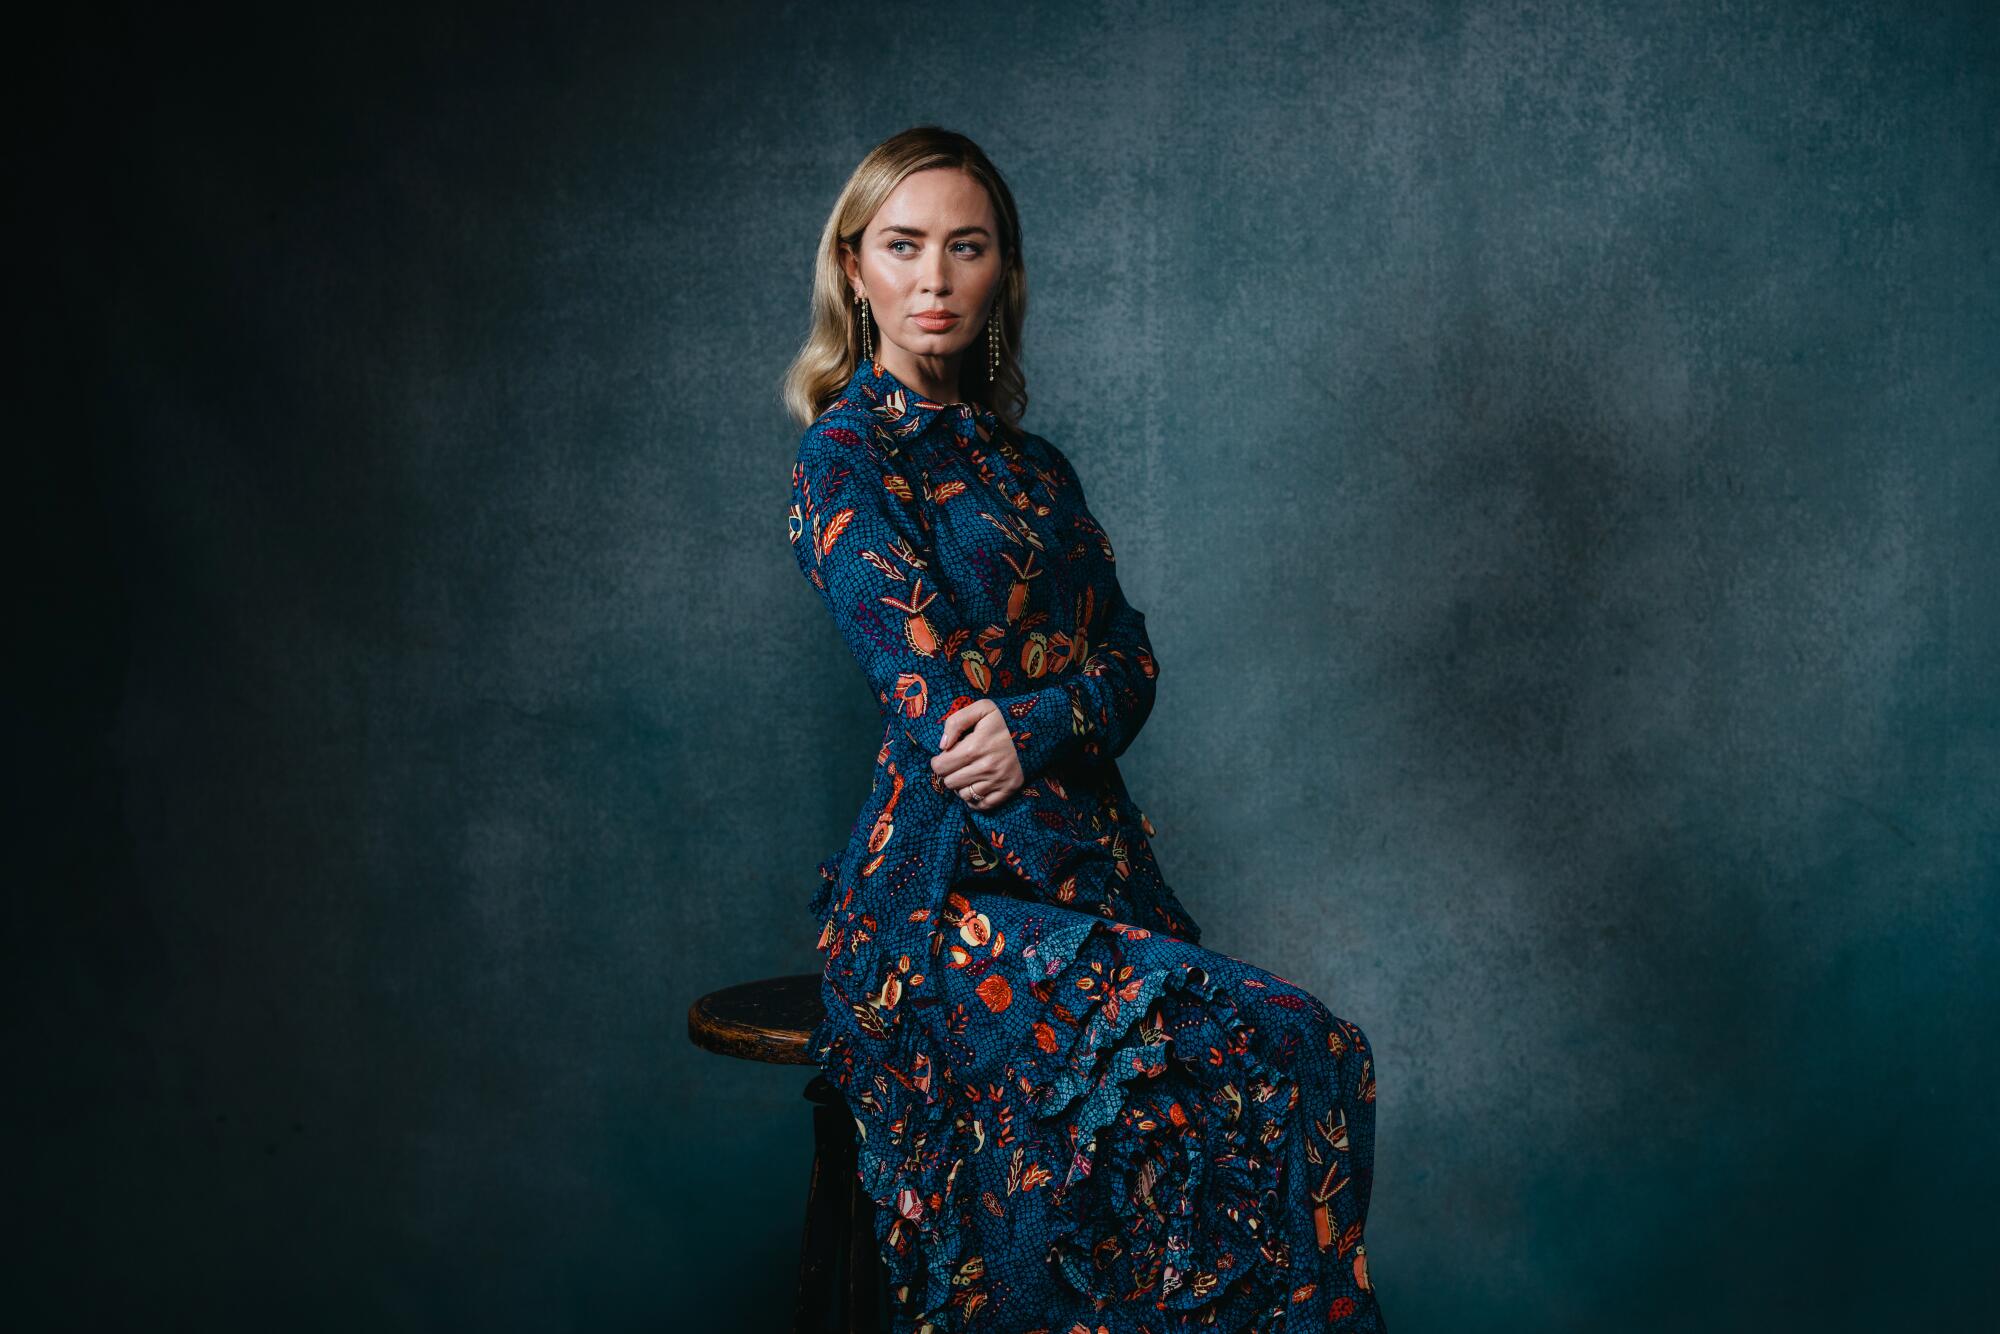 Emily Blunt folds her arms in front of her for a portrait.